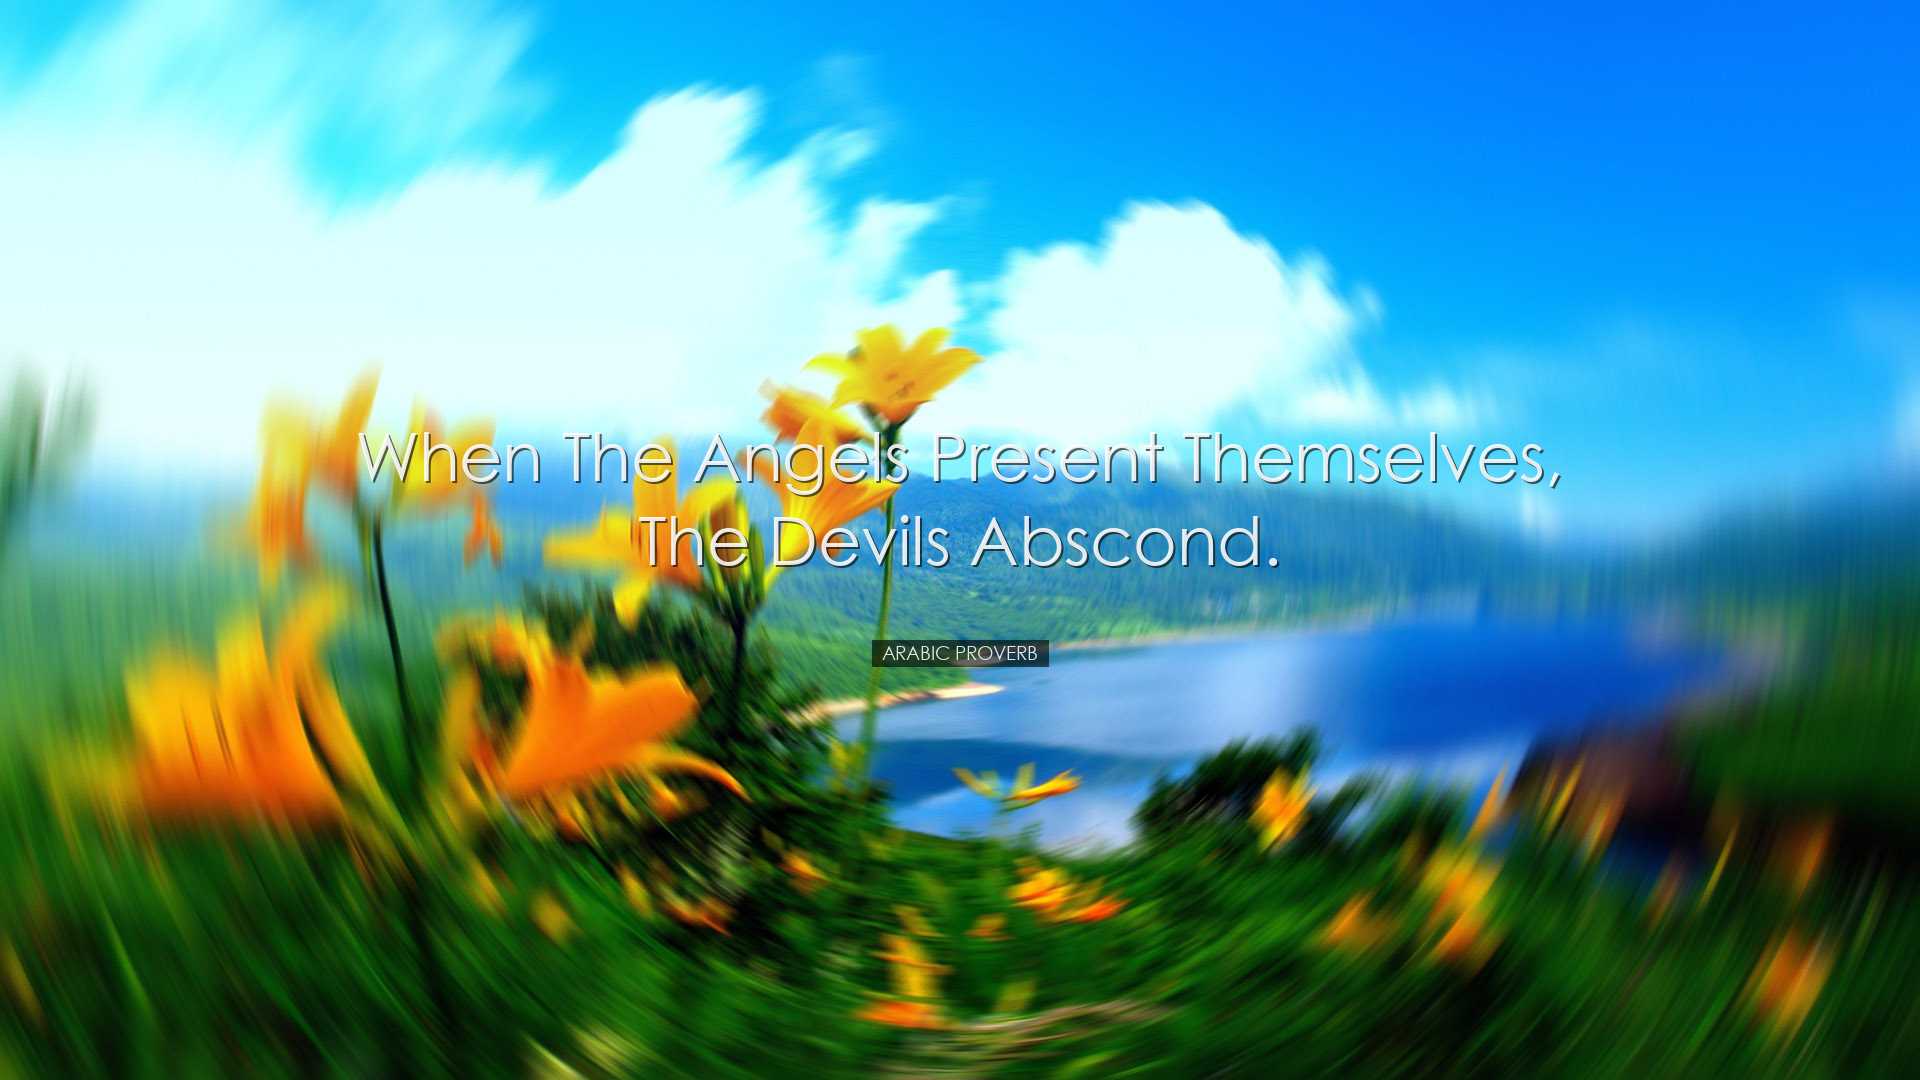 When the angels present themselves, the devils abscond. - Arabic P